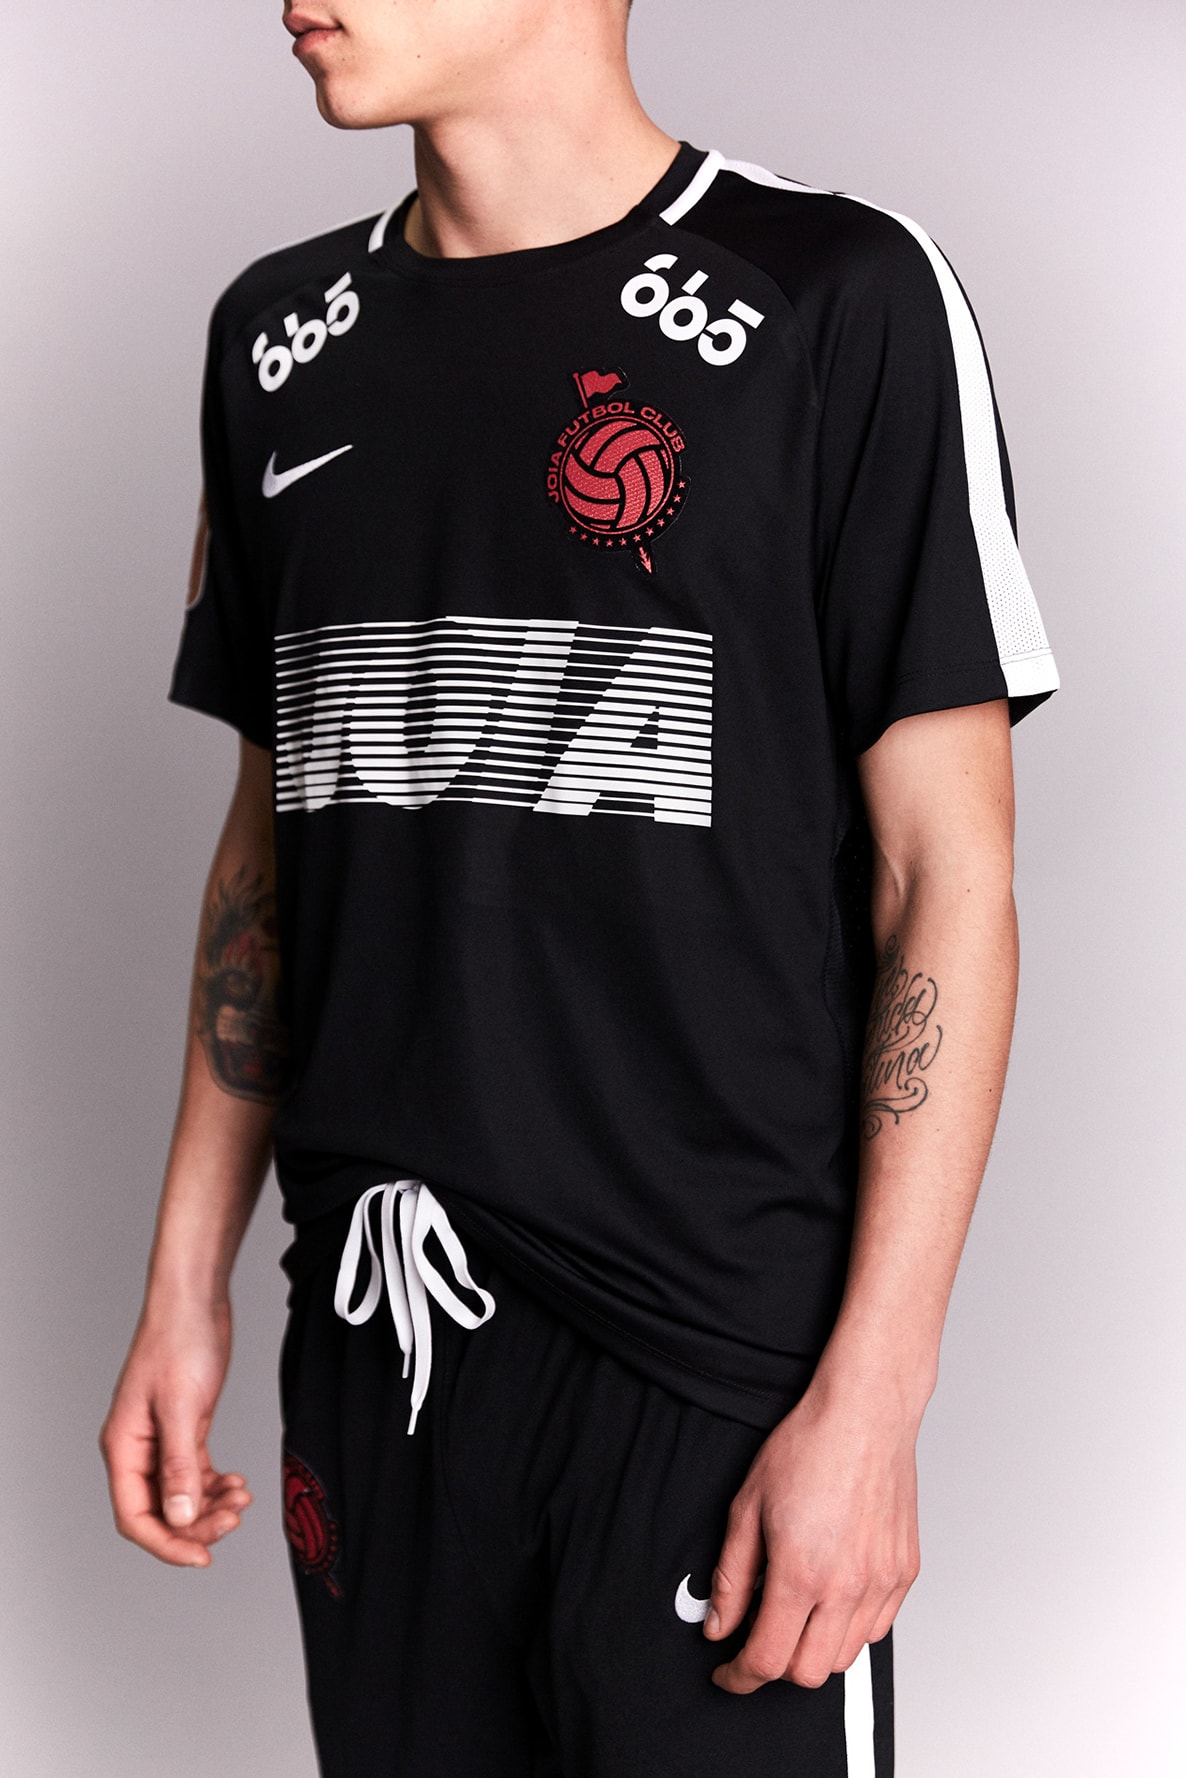 JOIA F.C. Nike Football Lookbook Collection Fashion MAGAZINE 2018 Fifa World Cup Chile Santiago Release Info Closer Look Details Soccer Jersey Tracksuit